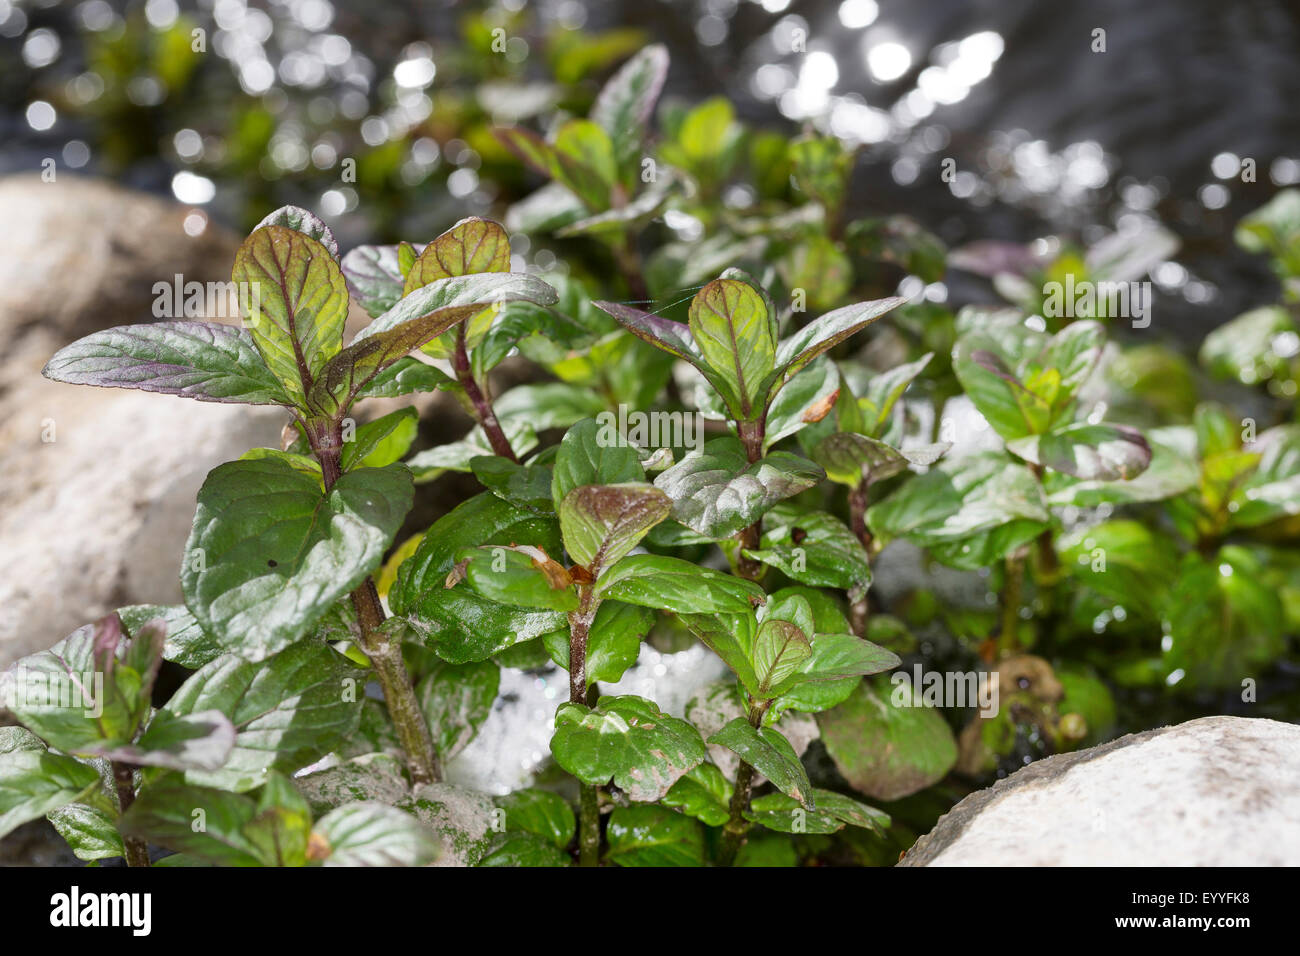 Wild water mint, Water mint, Horse mint (Mentha aquatica), leaves before flowers, Germany Stock Photo